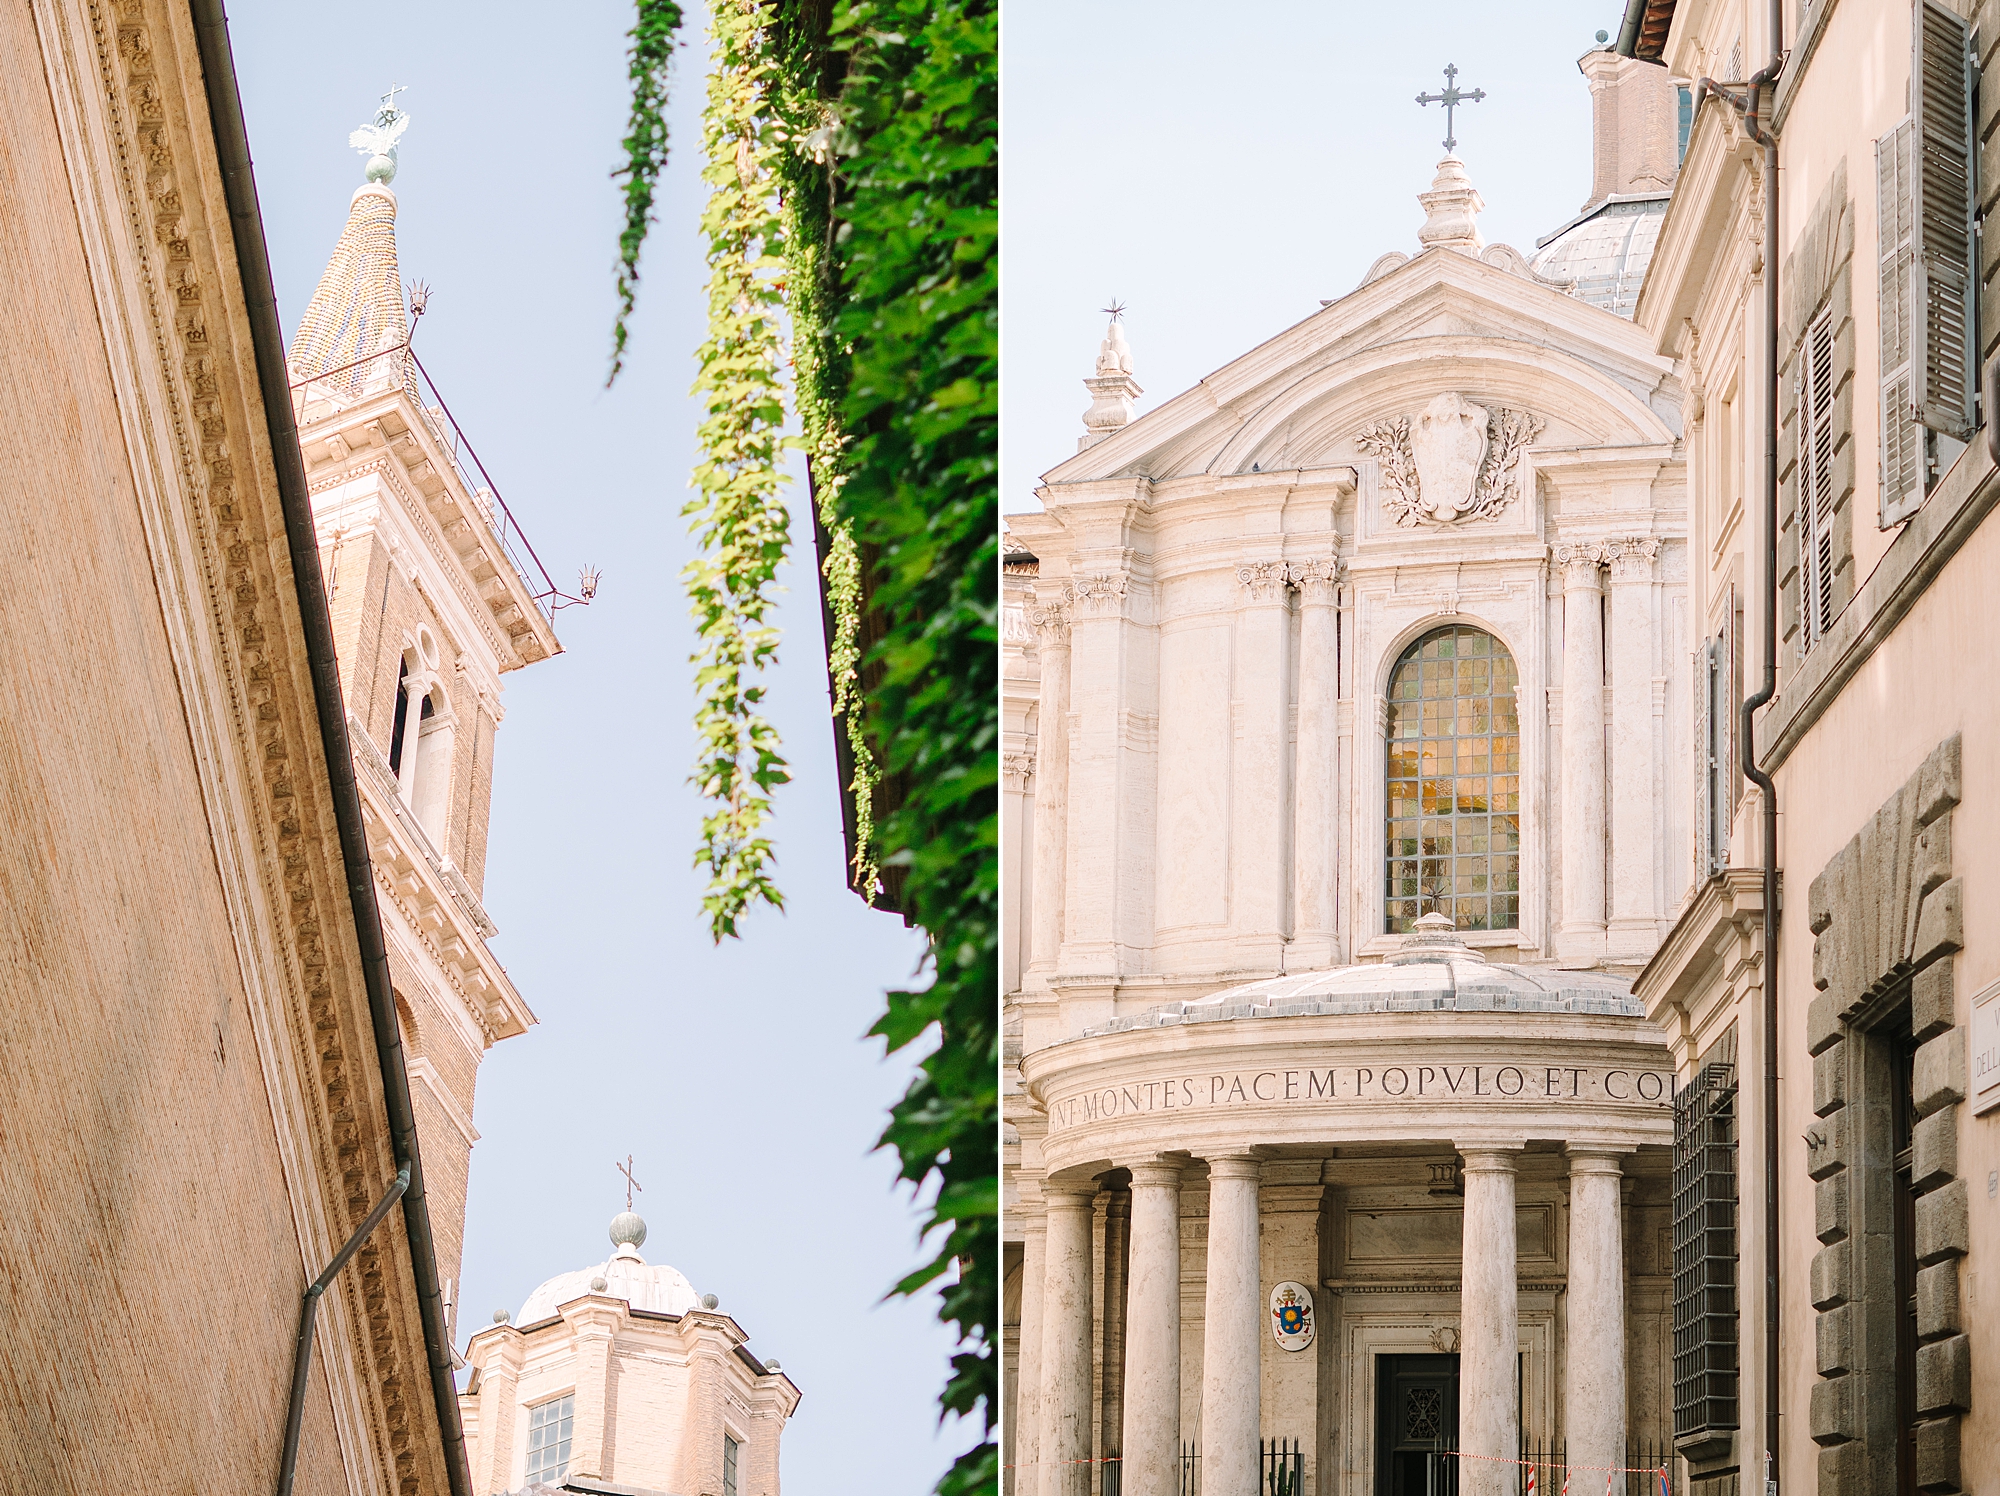 photographer Amy Allmand shares her trip to Italy in 2023 including her favorite stops